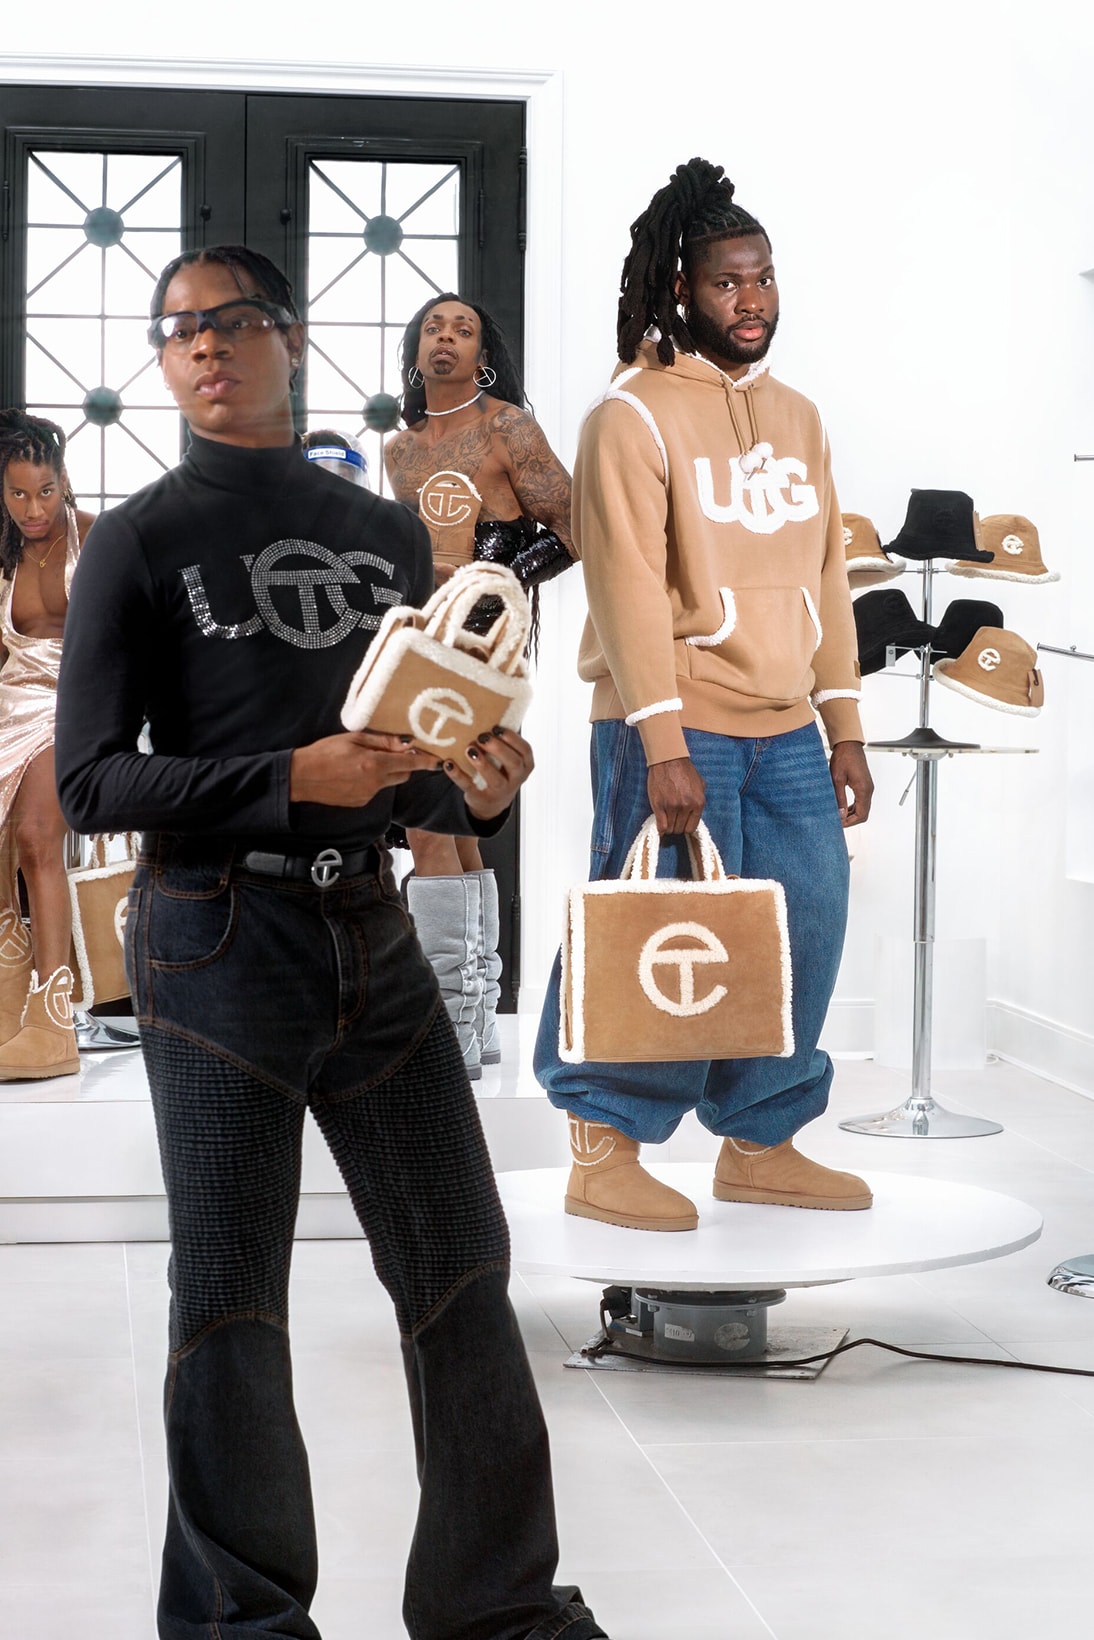 Ugg x Telfar collab: release date, how to buy and more